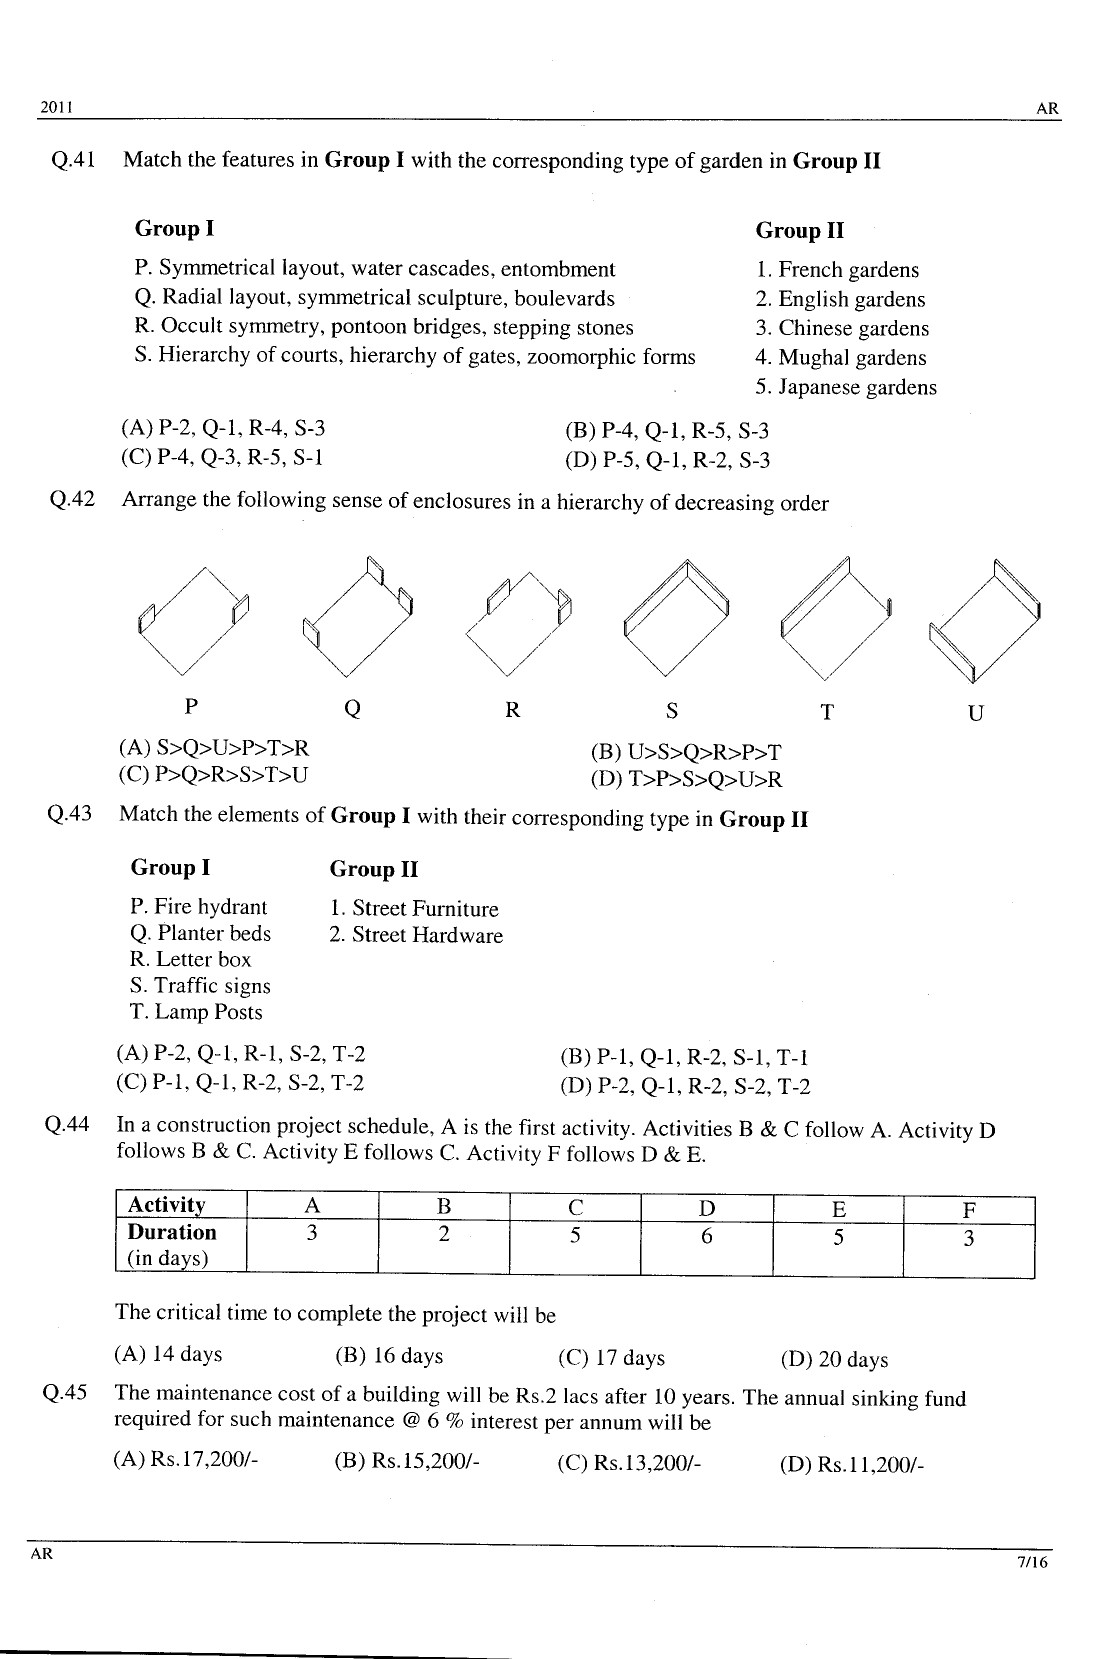 GATE Exam Question Paper 2011 Architecture and Planning 7